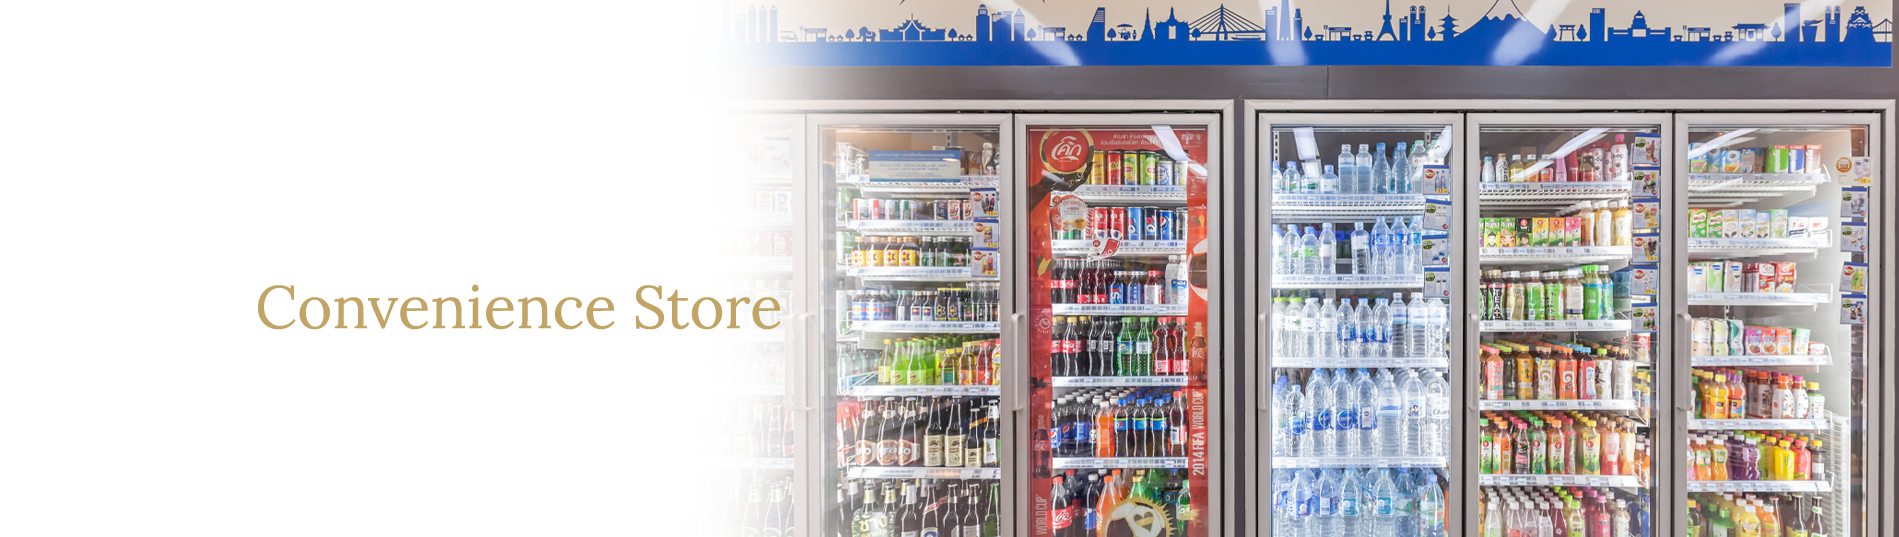 business_banner_convenience_store